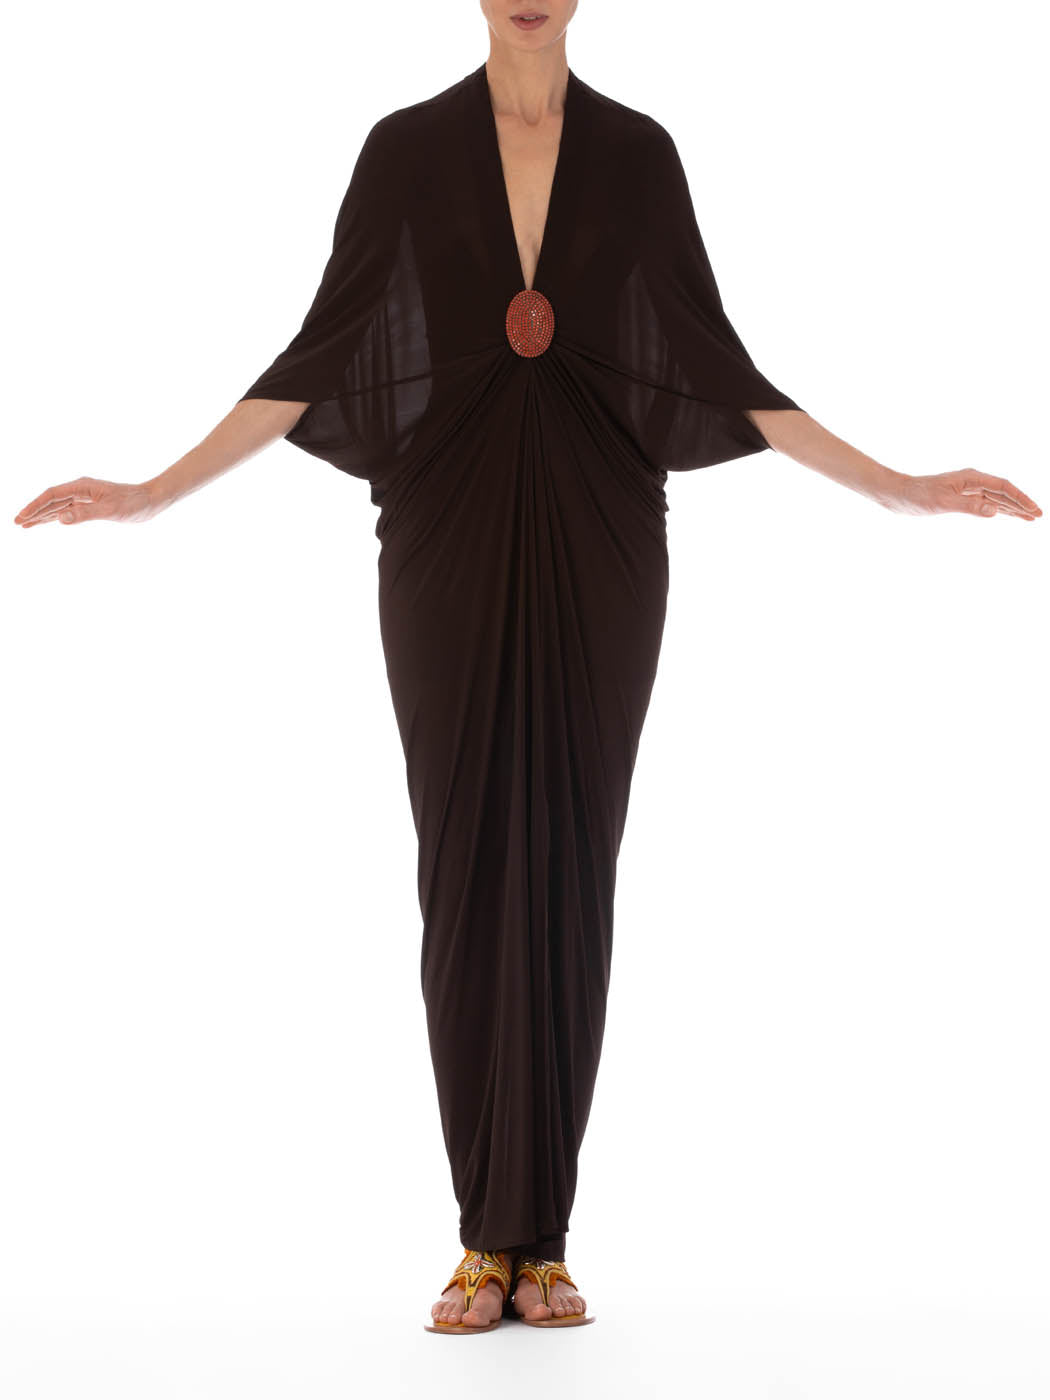 The Malu Dress Brown with draped sleeves and a decorative orange brooch at the waist, featuring a deep V neckline, displayed against a white background.